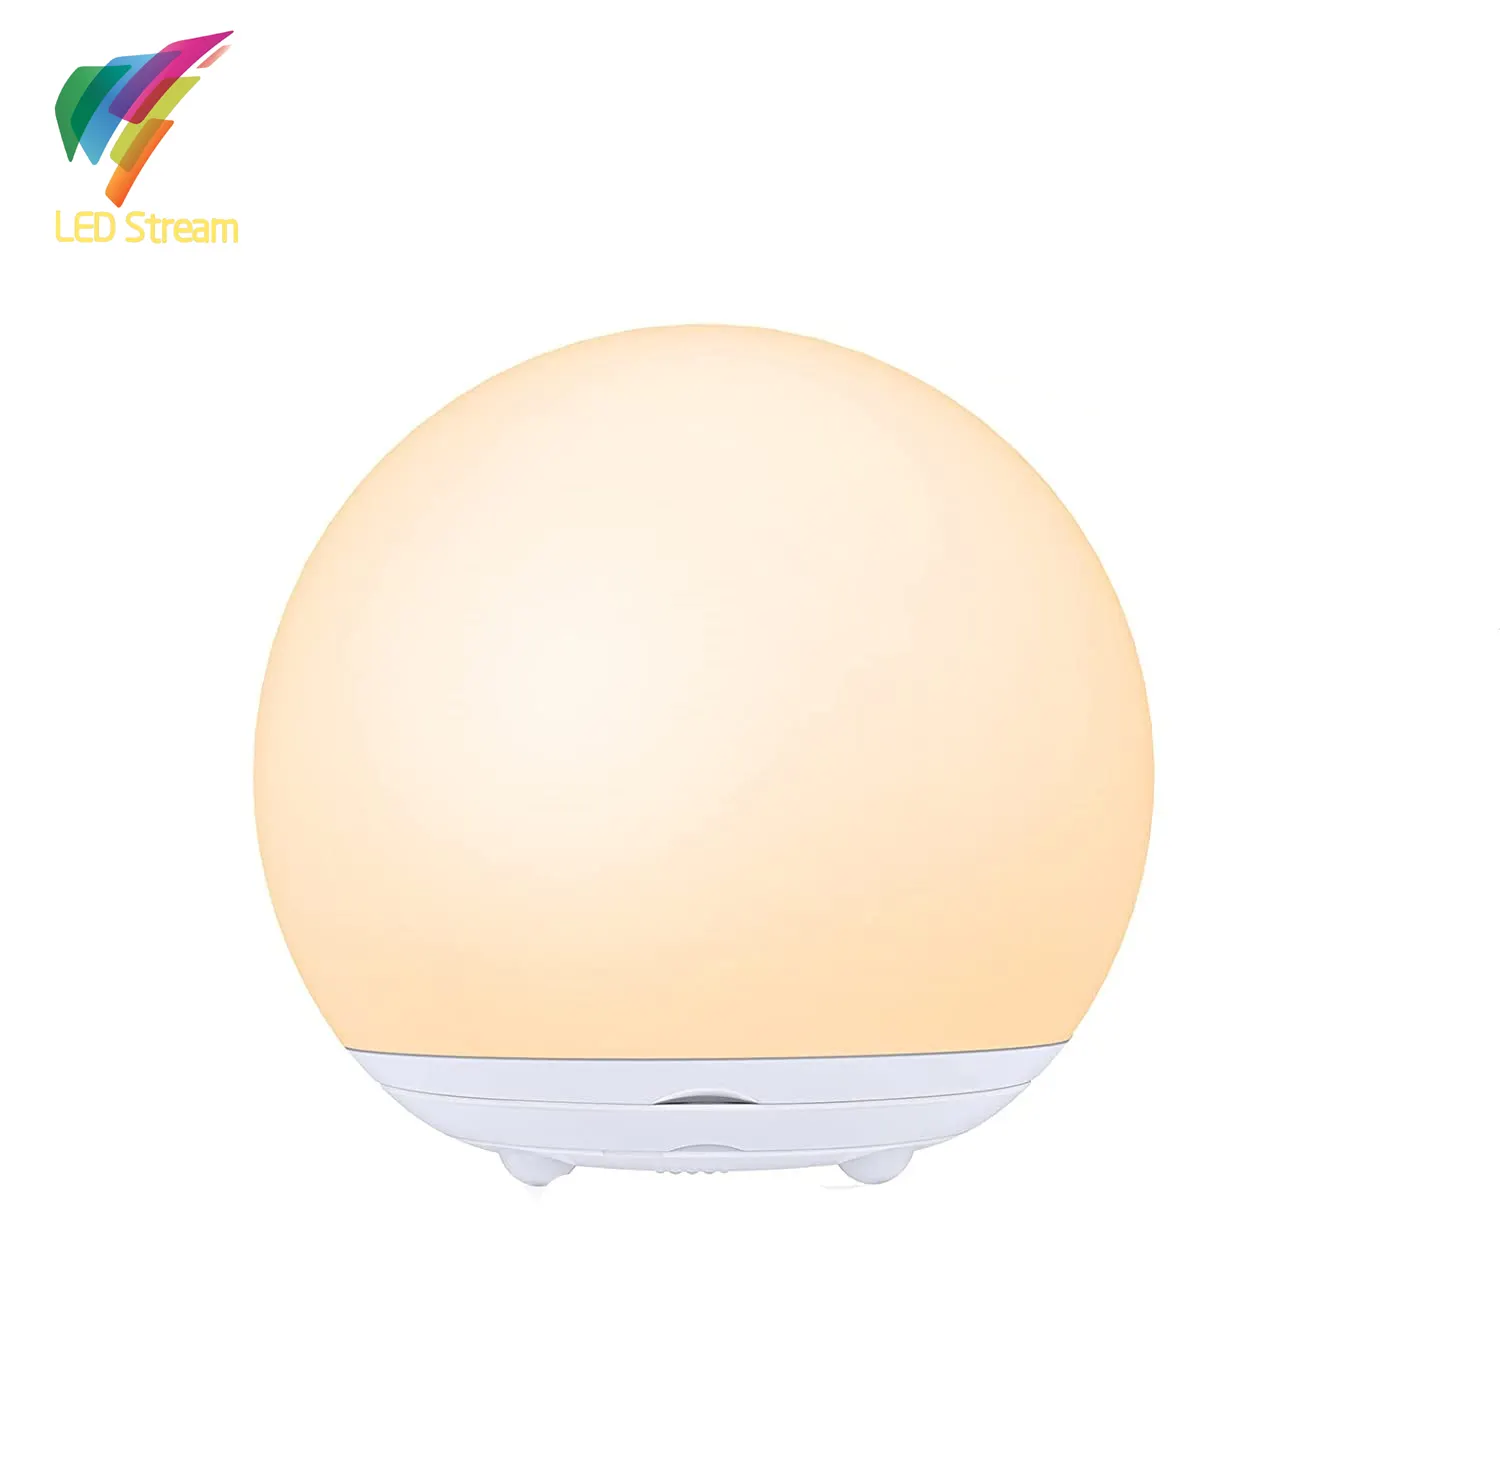 New IP 65 waterproof RGB color changing light safety soft silicone ball for infants and children's kindergarten LED night light